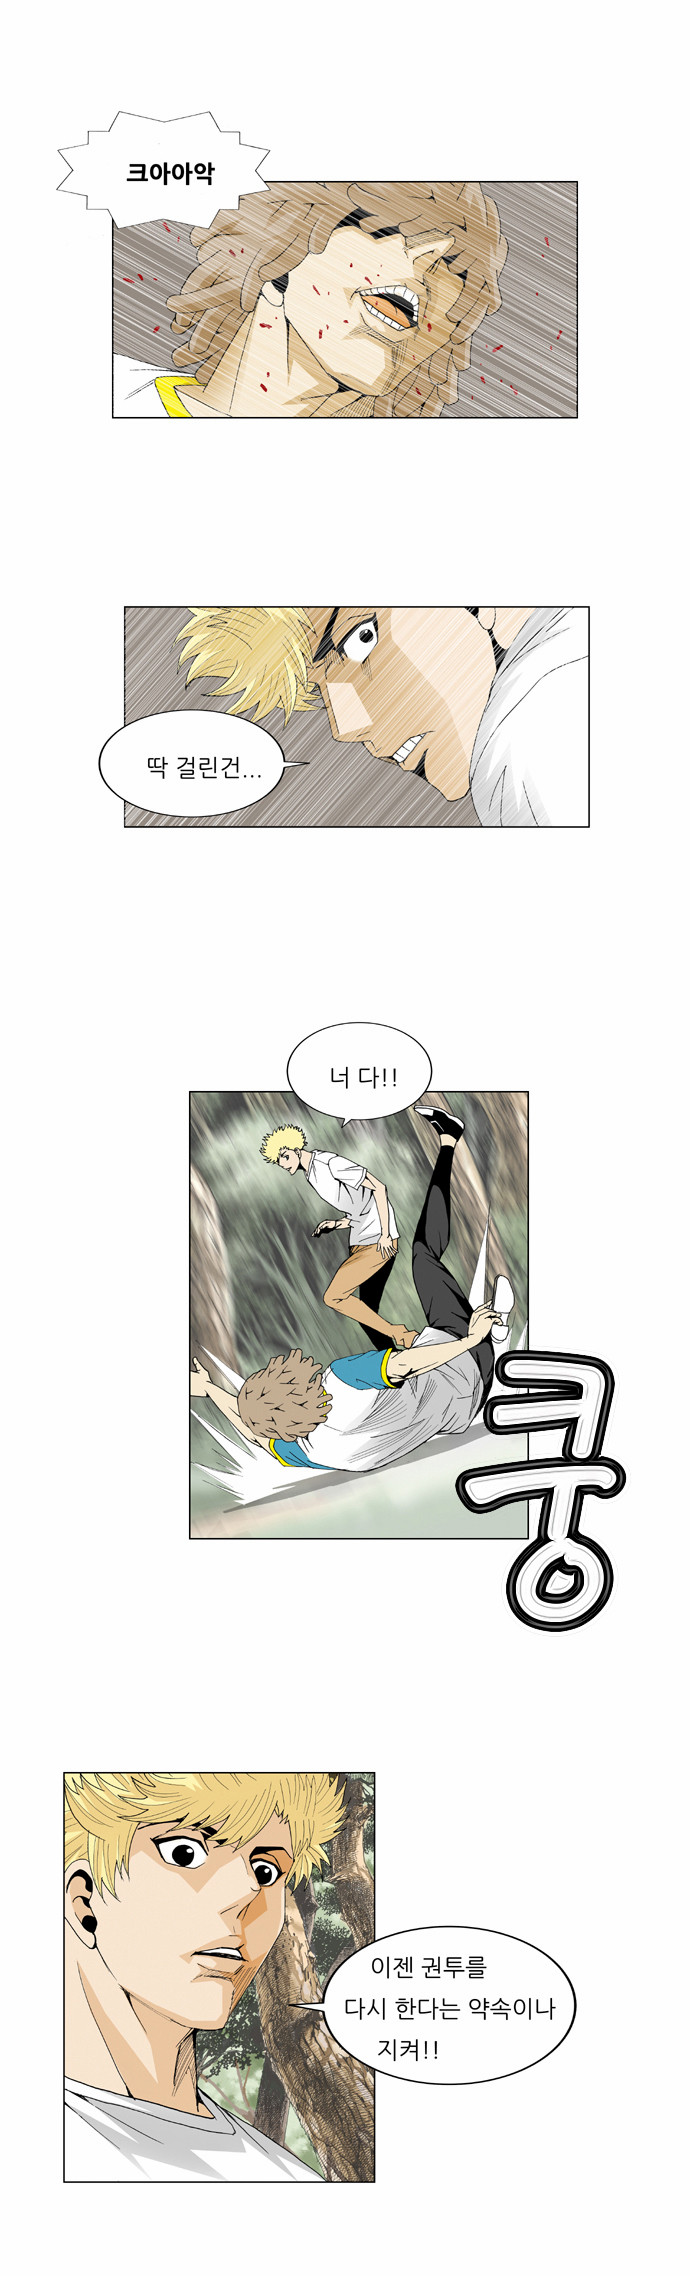 Ultimate Legend - Kang Hae Hyo - Chapter 45 - Page 10